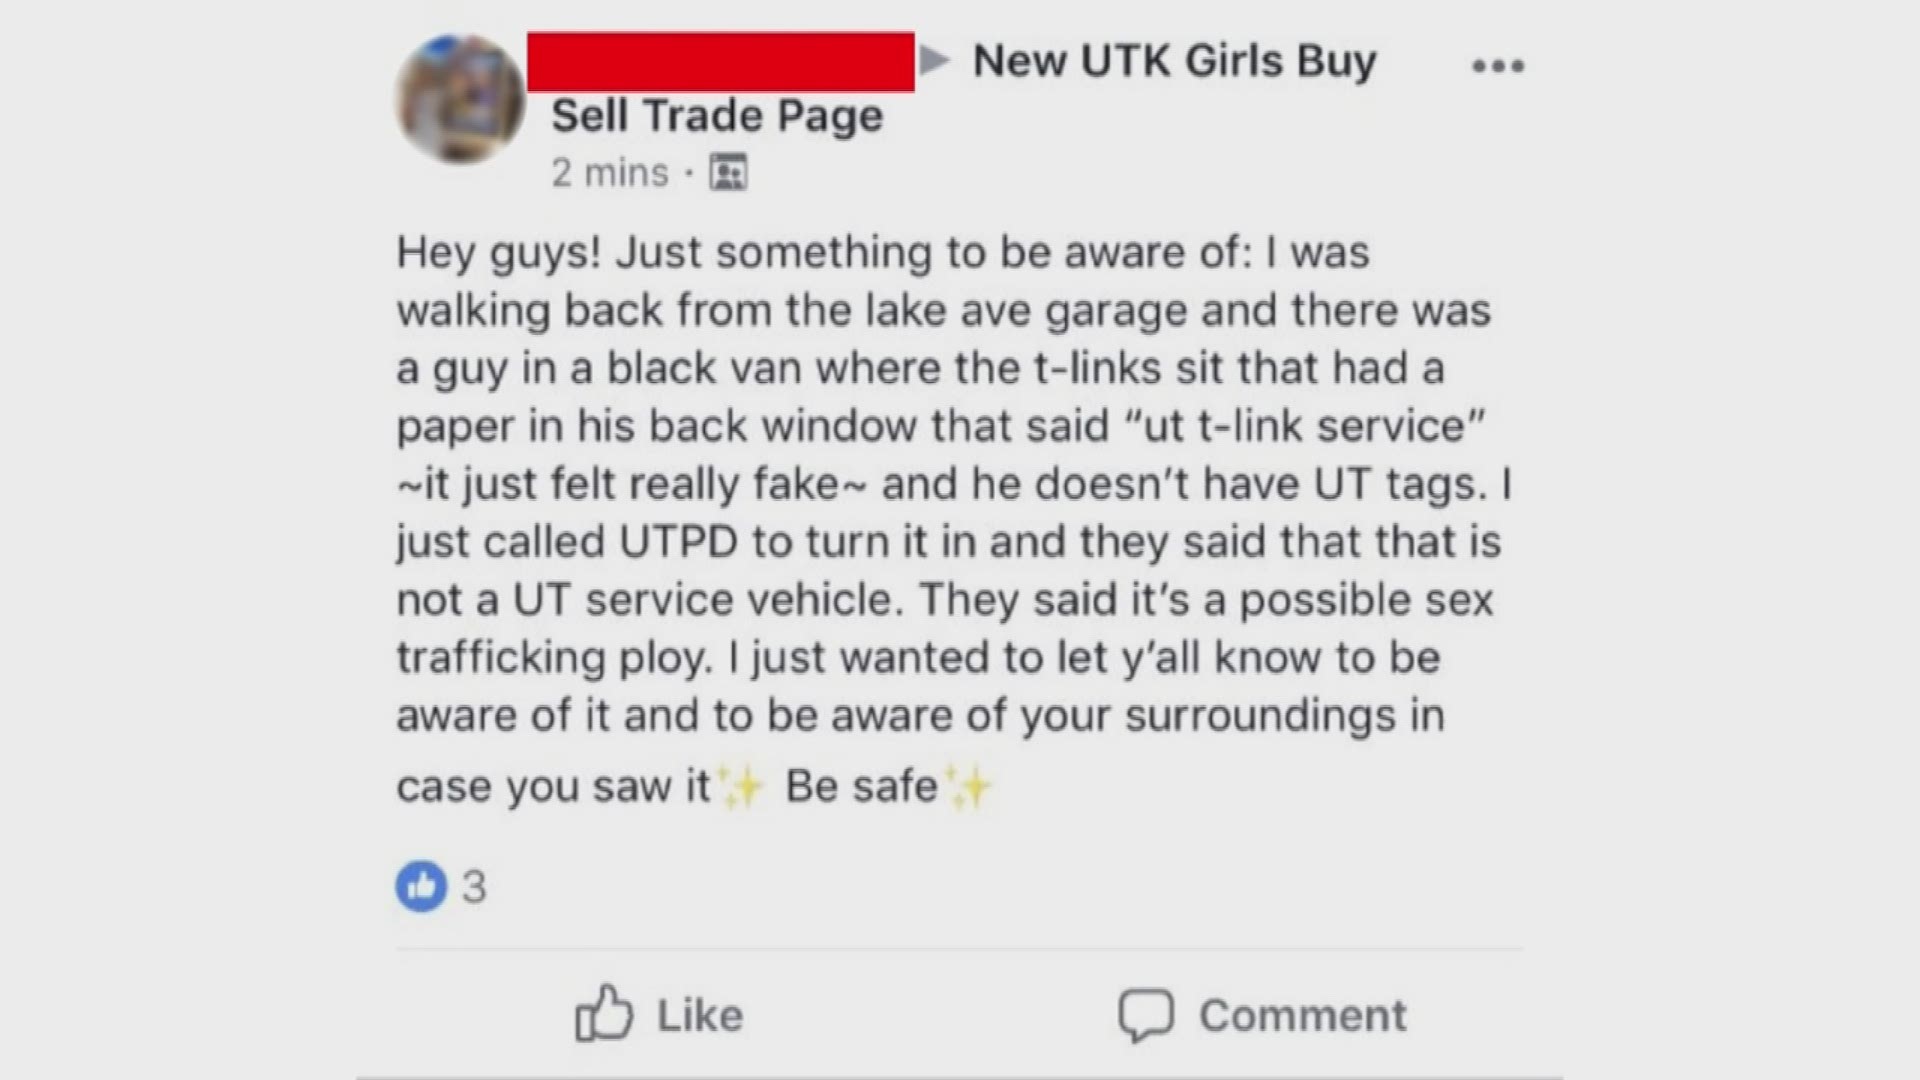 There's concern on the Tennessee campus that a van with a fake sign in the window was pretending to be part of the transportation service. UT says that it was just a temporary vehicle being used while a primary vehicle was out of service.